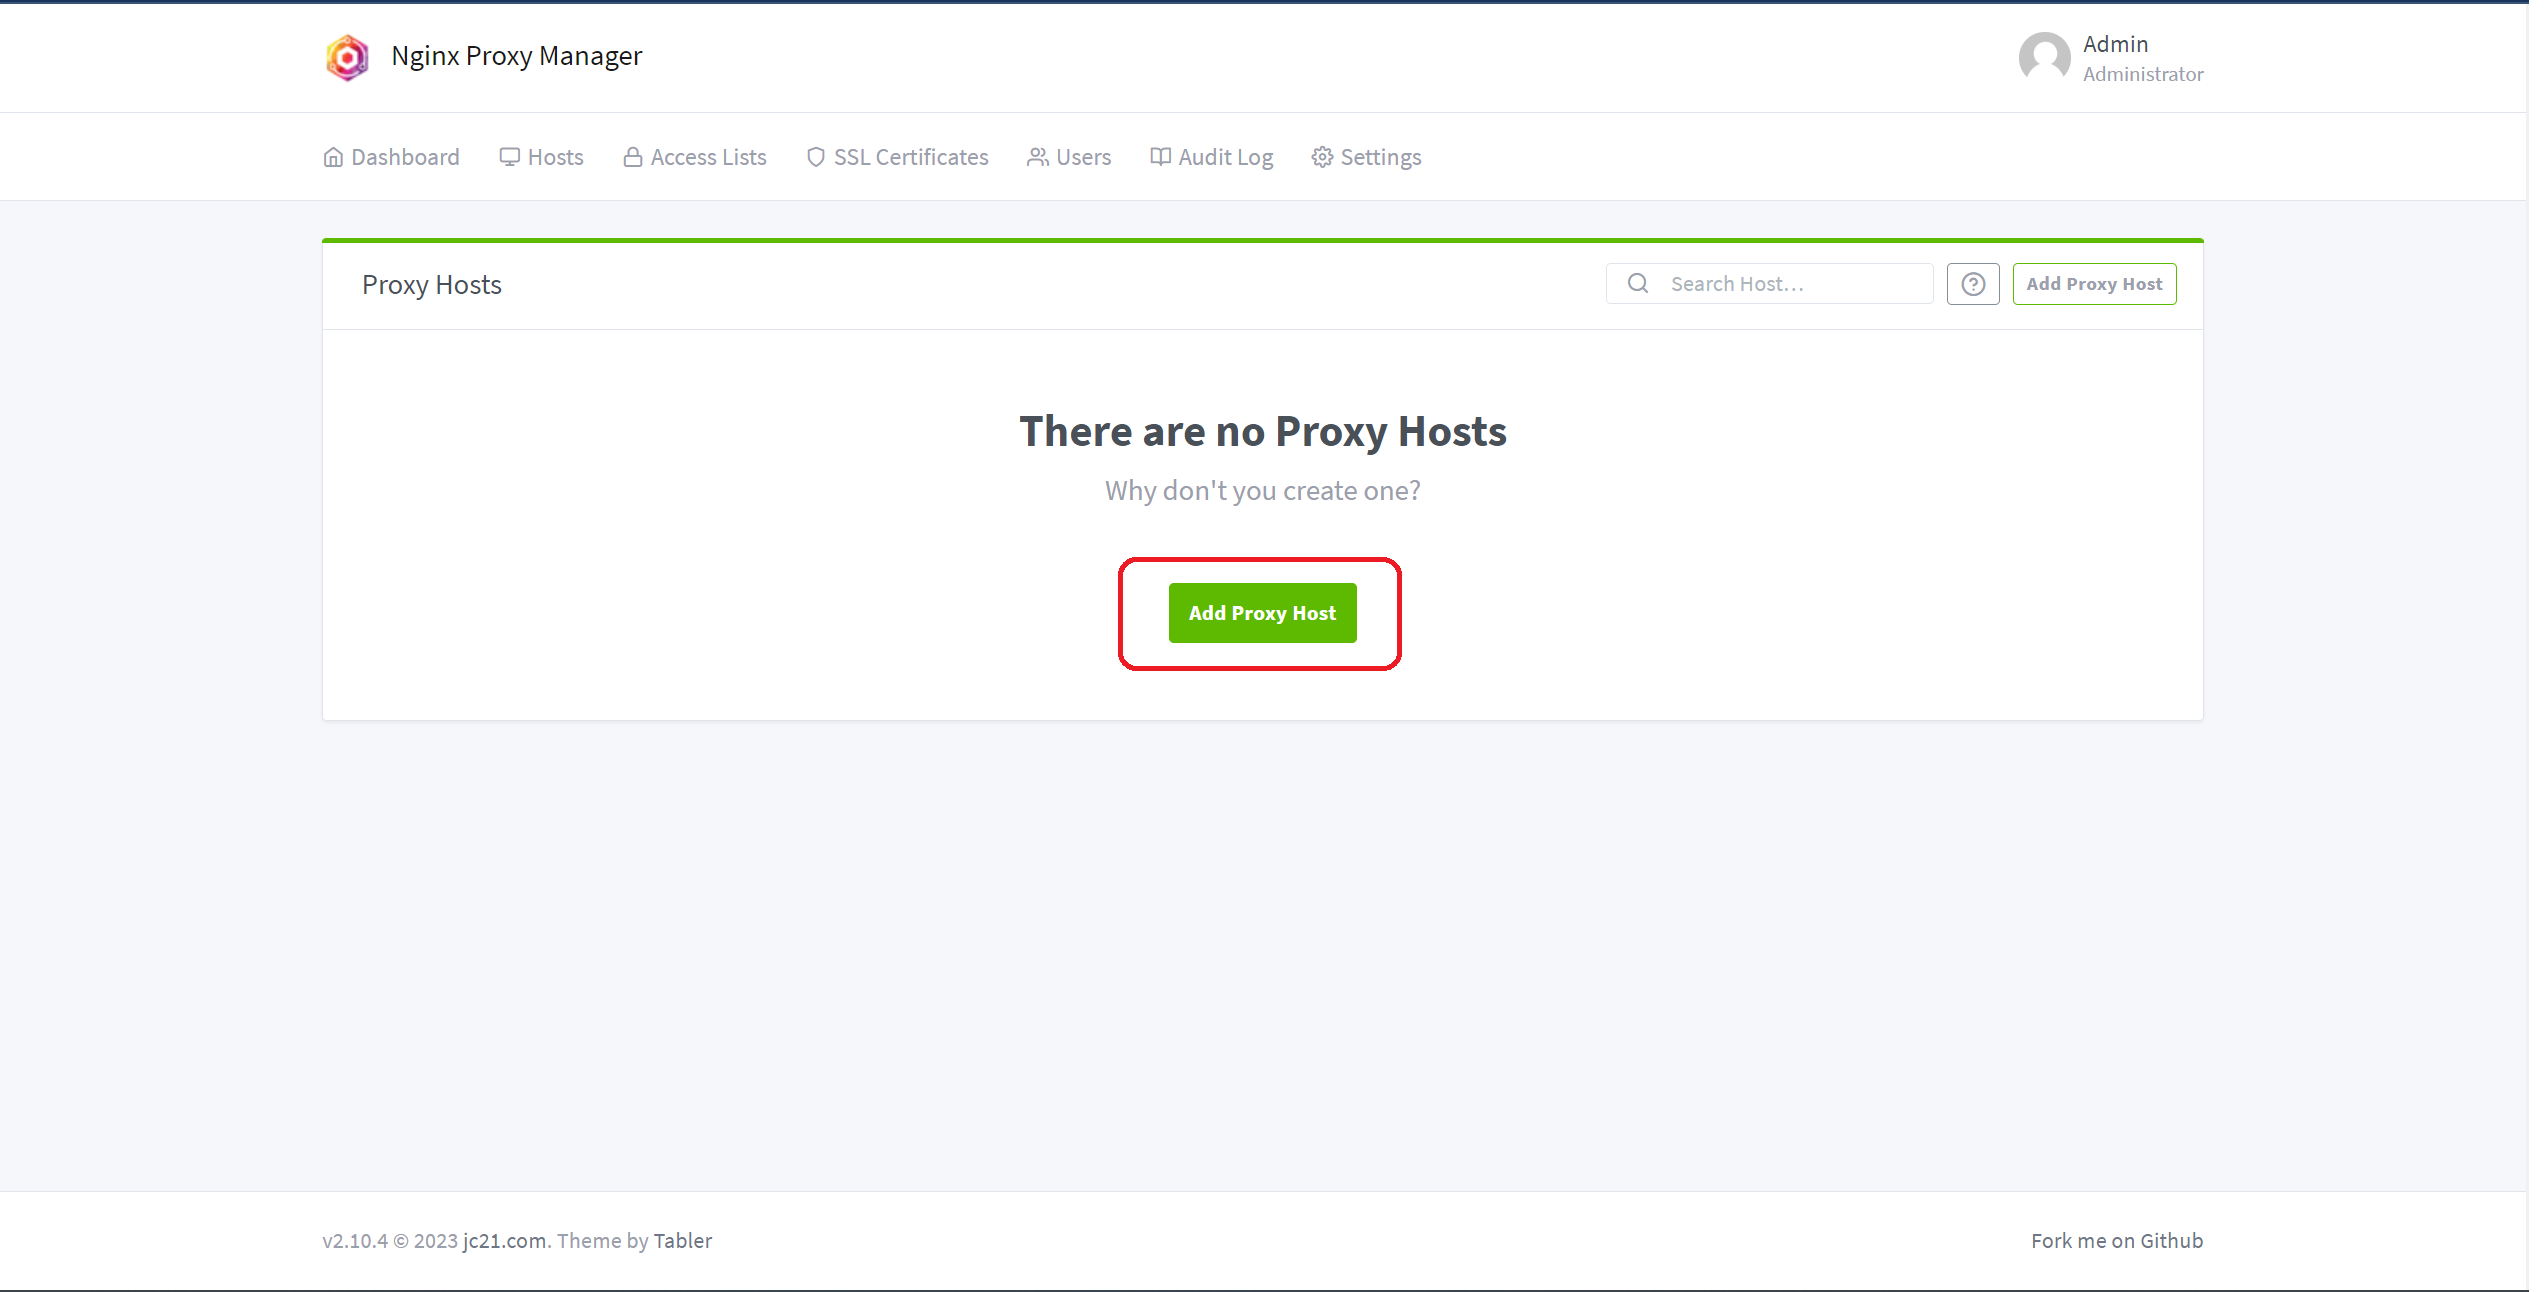 image: There are no Proxy Hosts